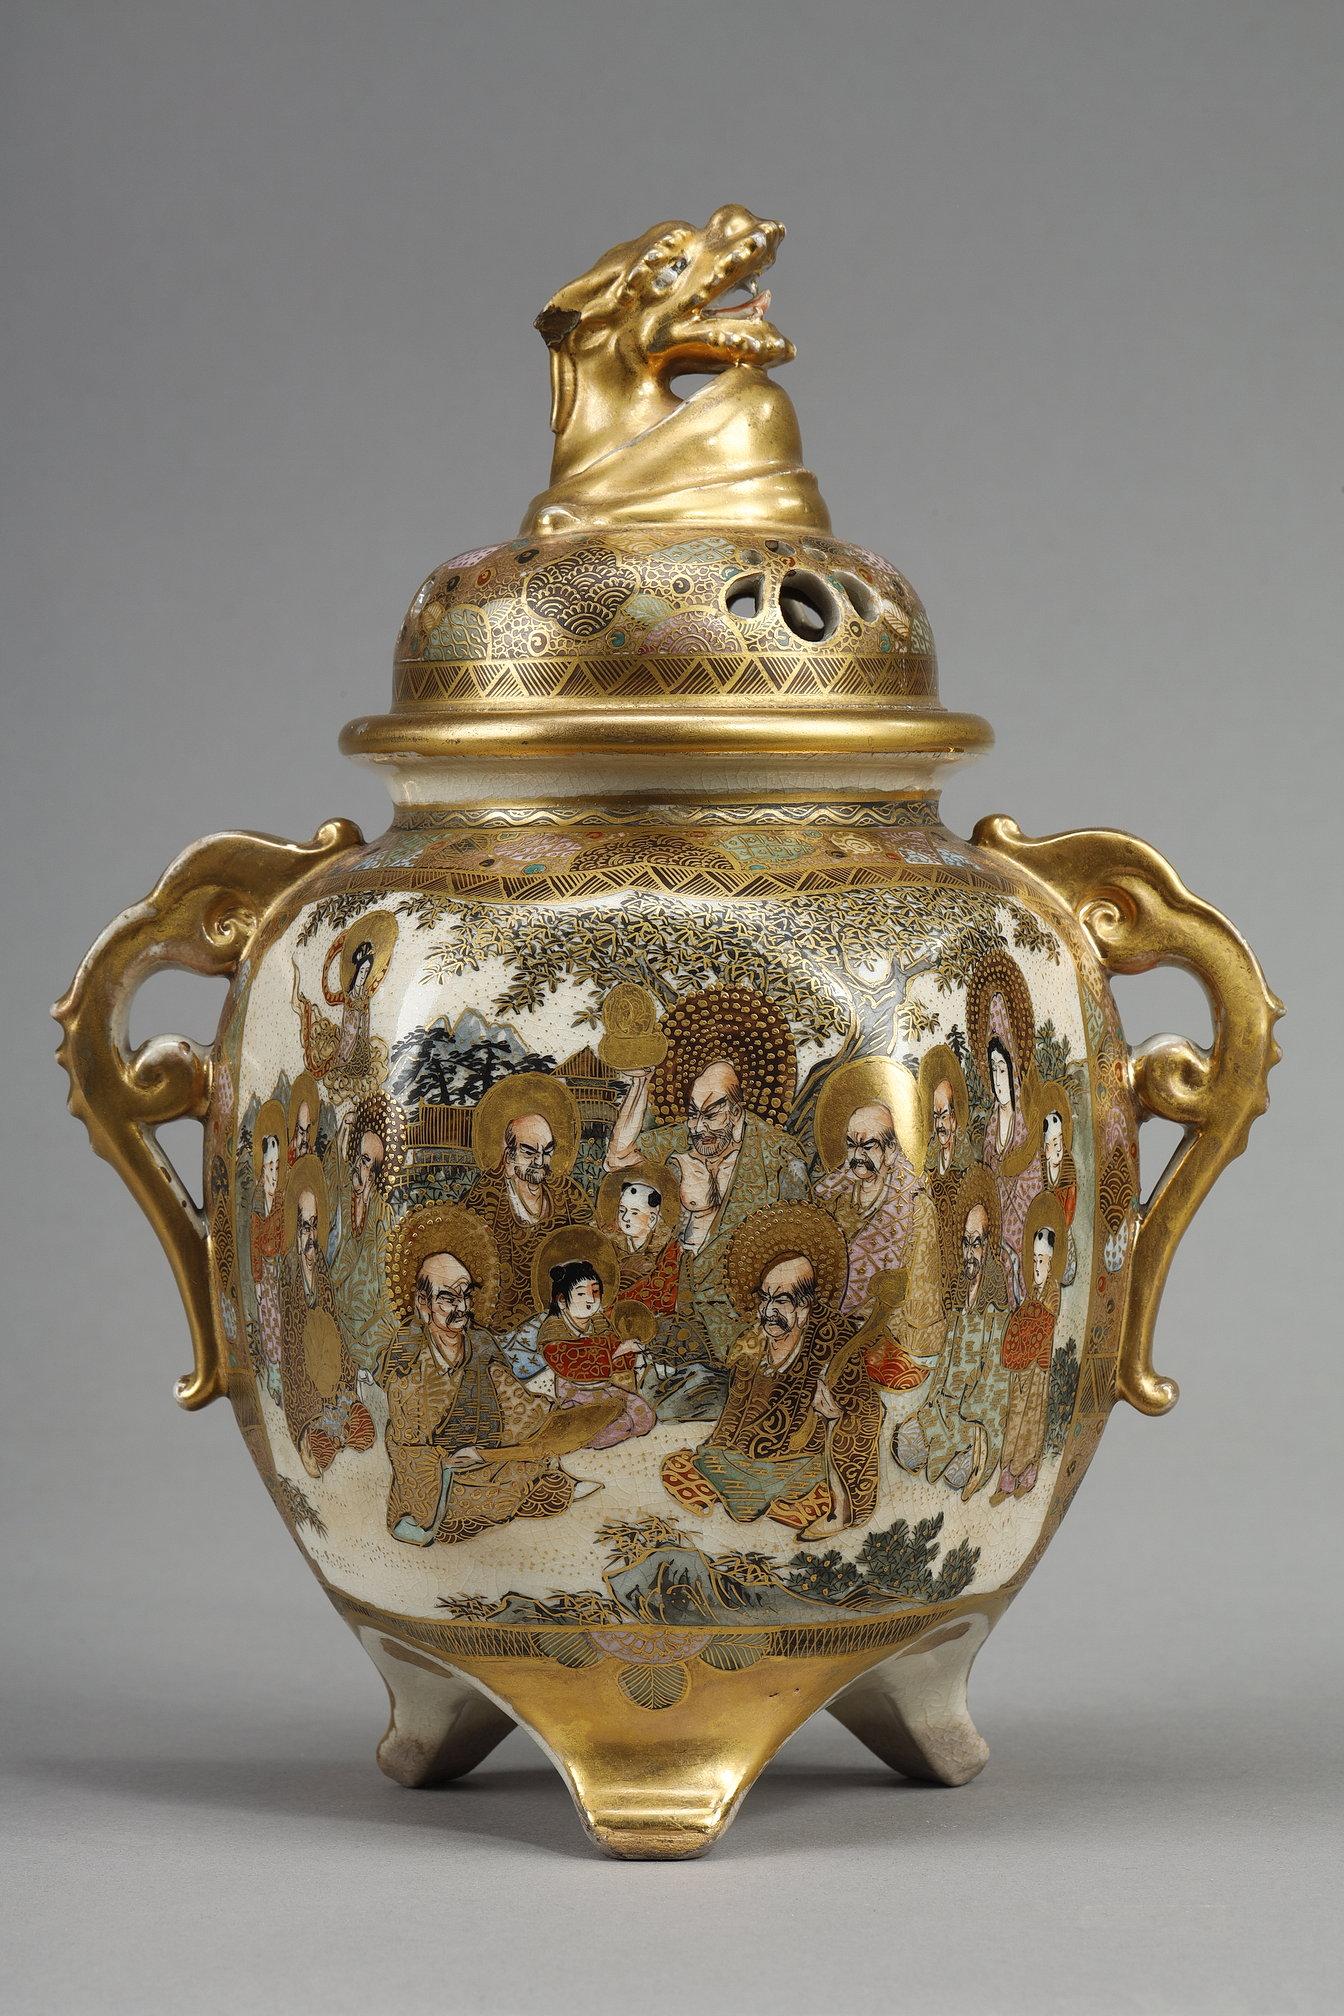 Satsuma earthenware tripod perfume burner with polychrome and gold enamel decoration. The body is decorated on one side with richly dressed figures representing masters instructing two young children, and on the other with scenes of daily life. The